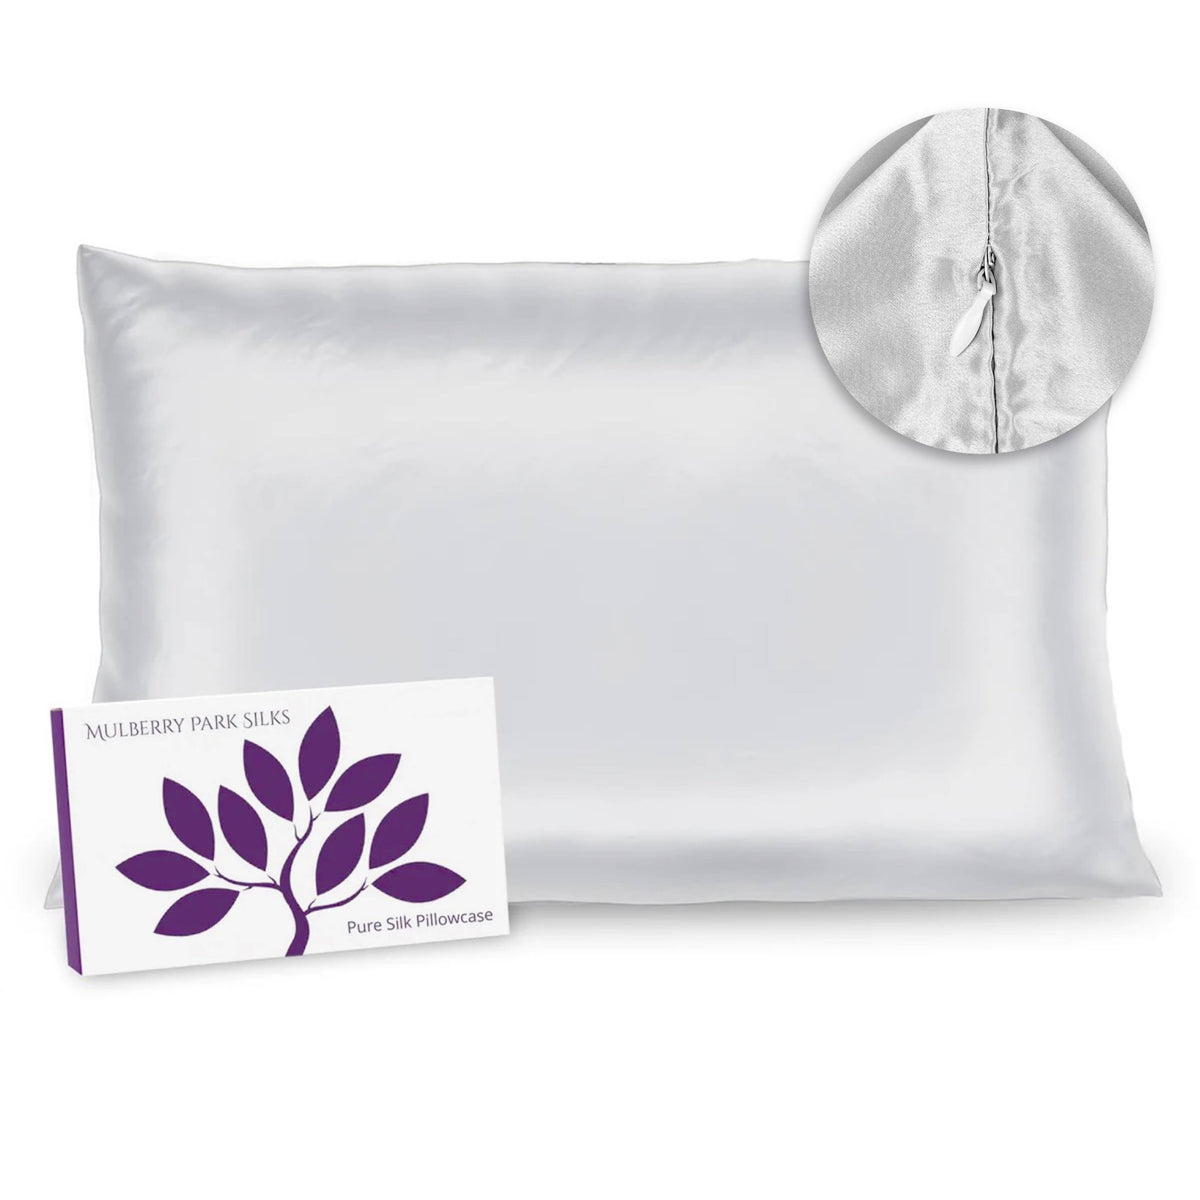 Zoom of Hidden Zipper of Mulberry Park Silks Deluxe 19 Momme Pure Silk Pillowcase in White Color with Box